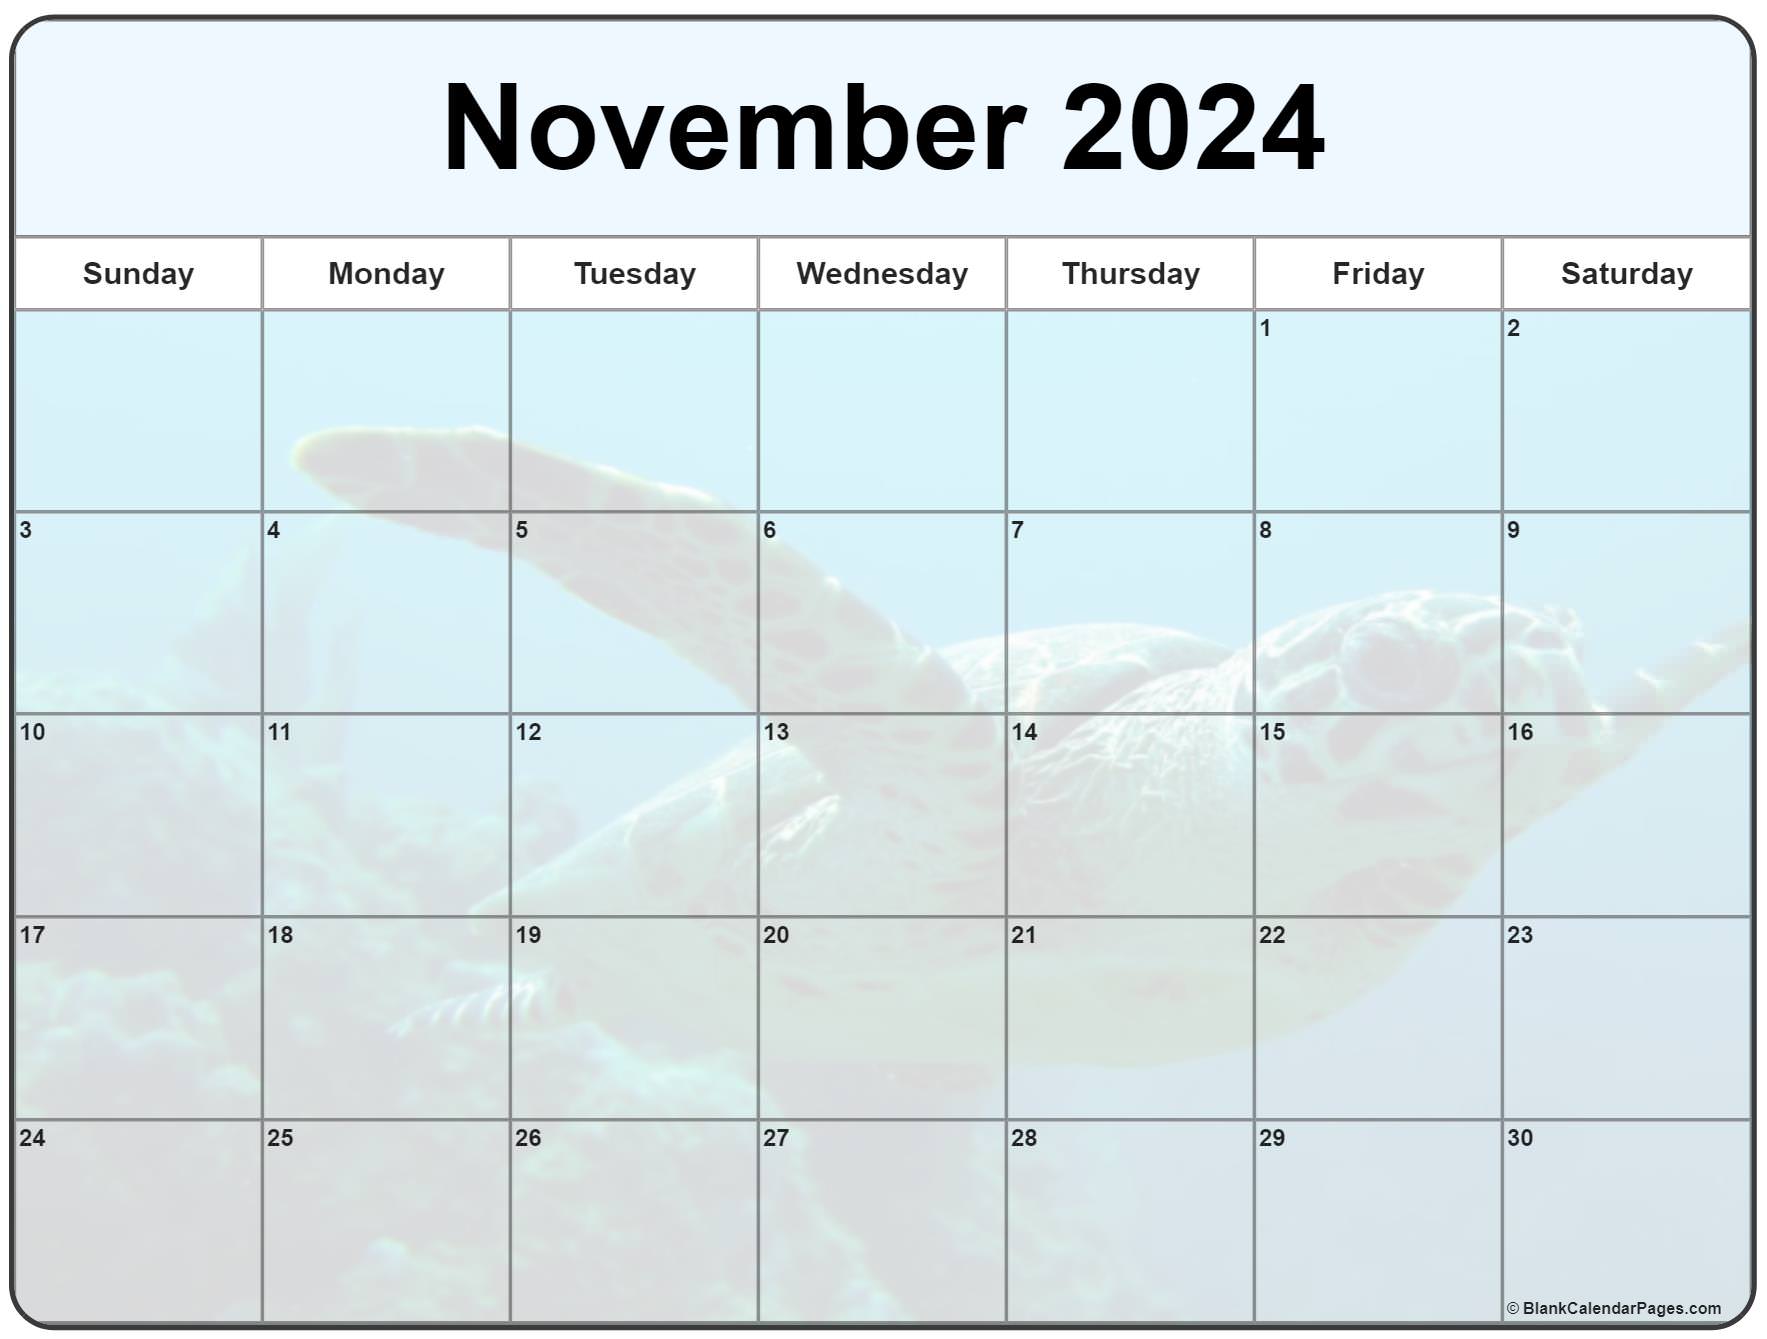 Collection of November 2024 photo calendars with image filters.